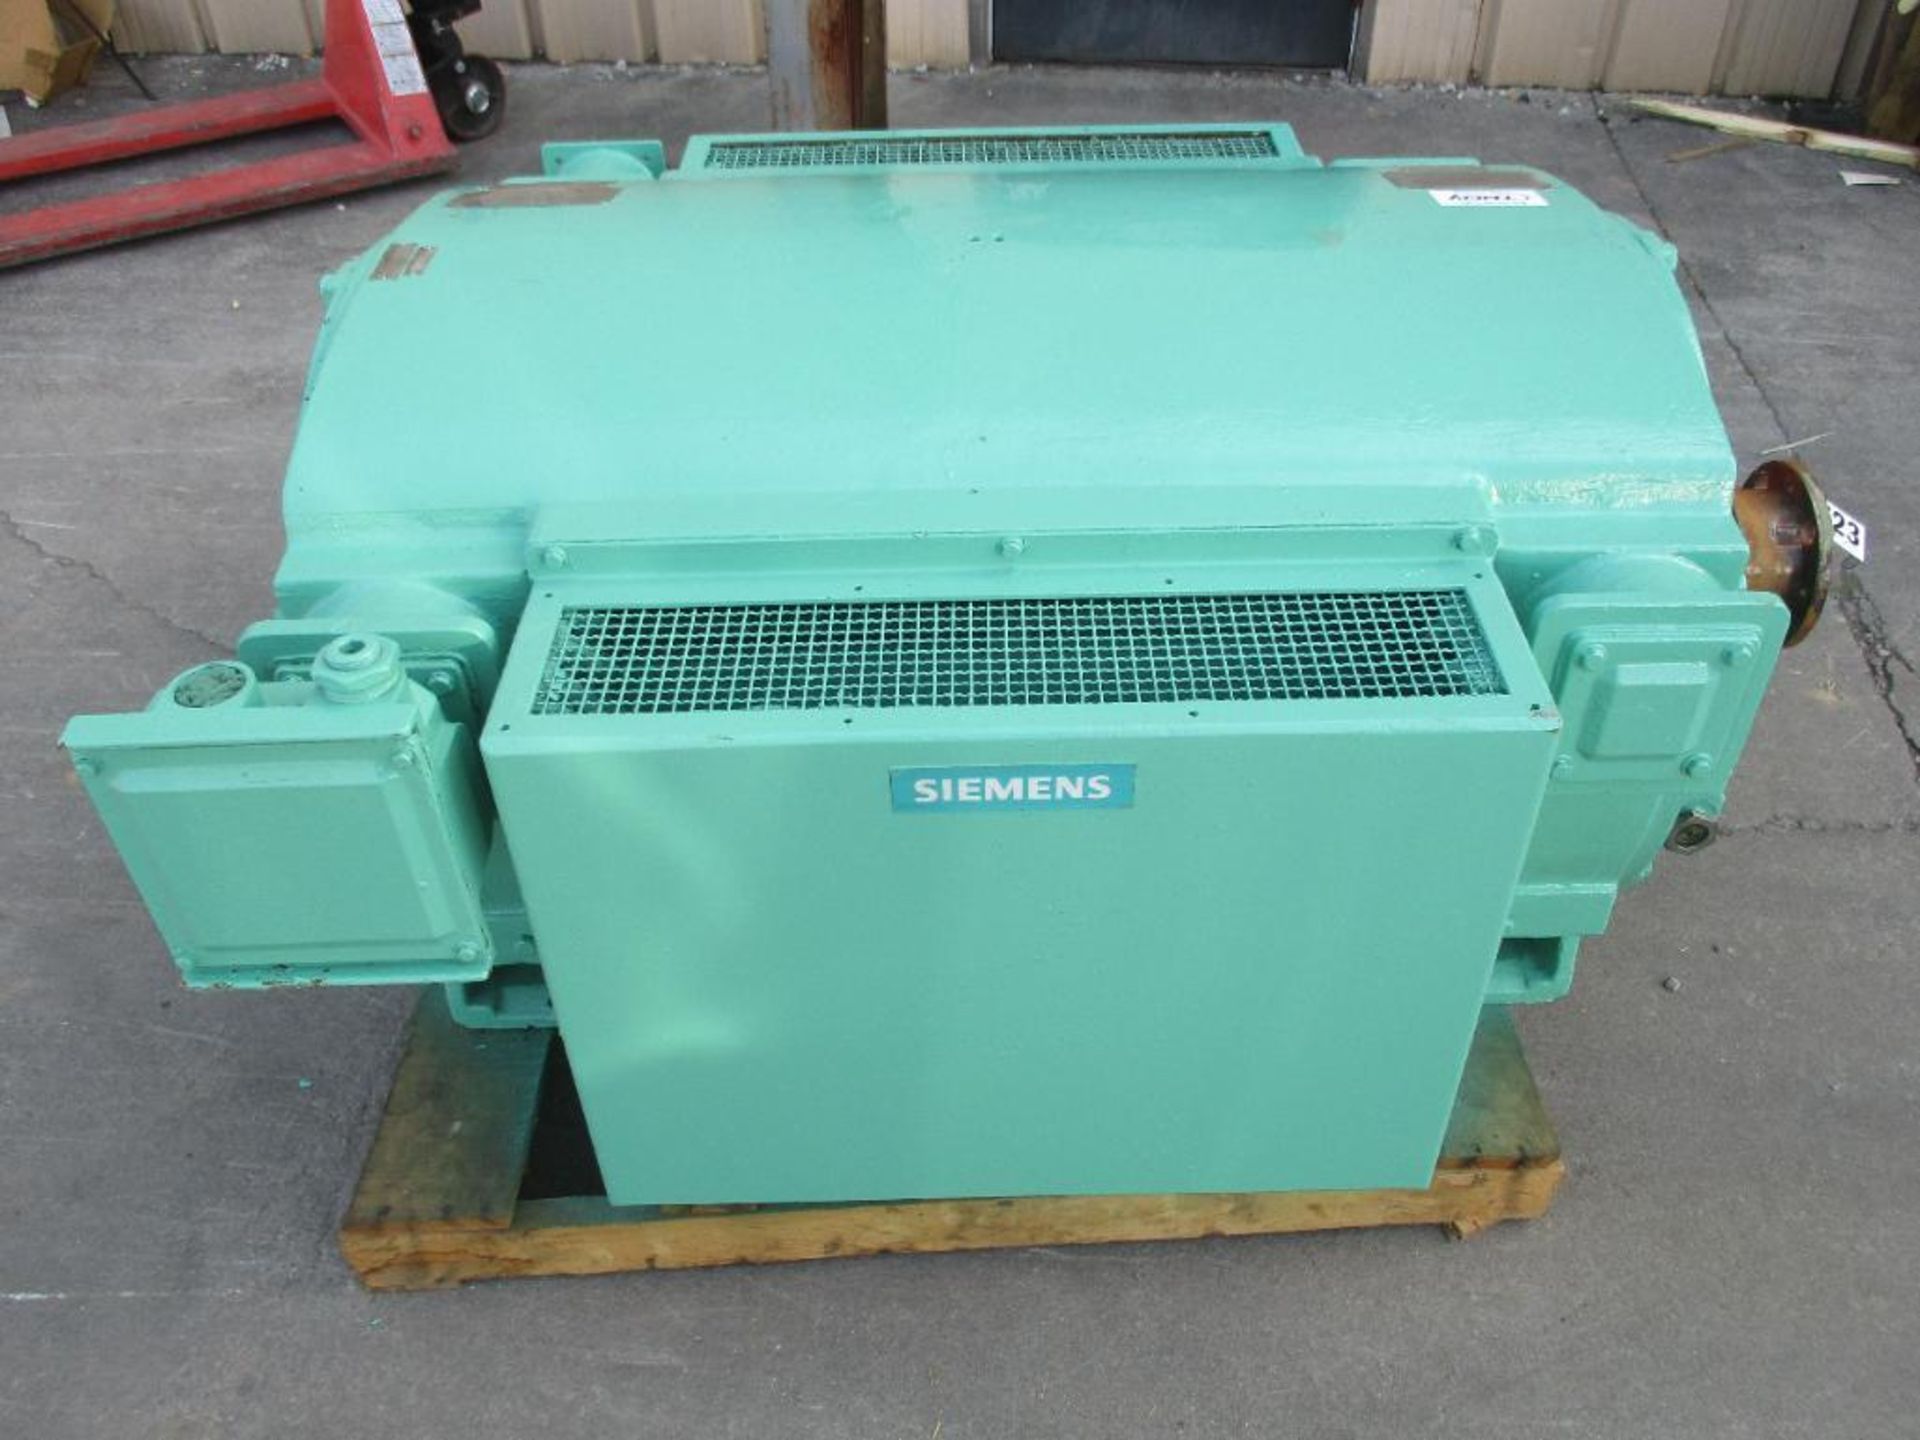 SIEMENS 3 PHASE 800HP 3563RPM 5010S FRAME A/C MOTOR P/N 1796567-13316 (THIS LOT IS FOB KNOXVILLE TN) - Image 5 of 5